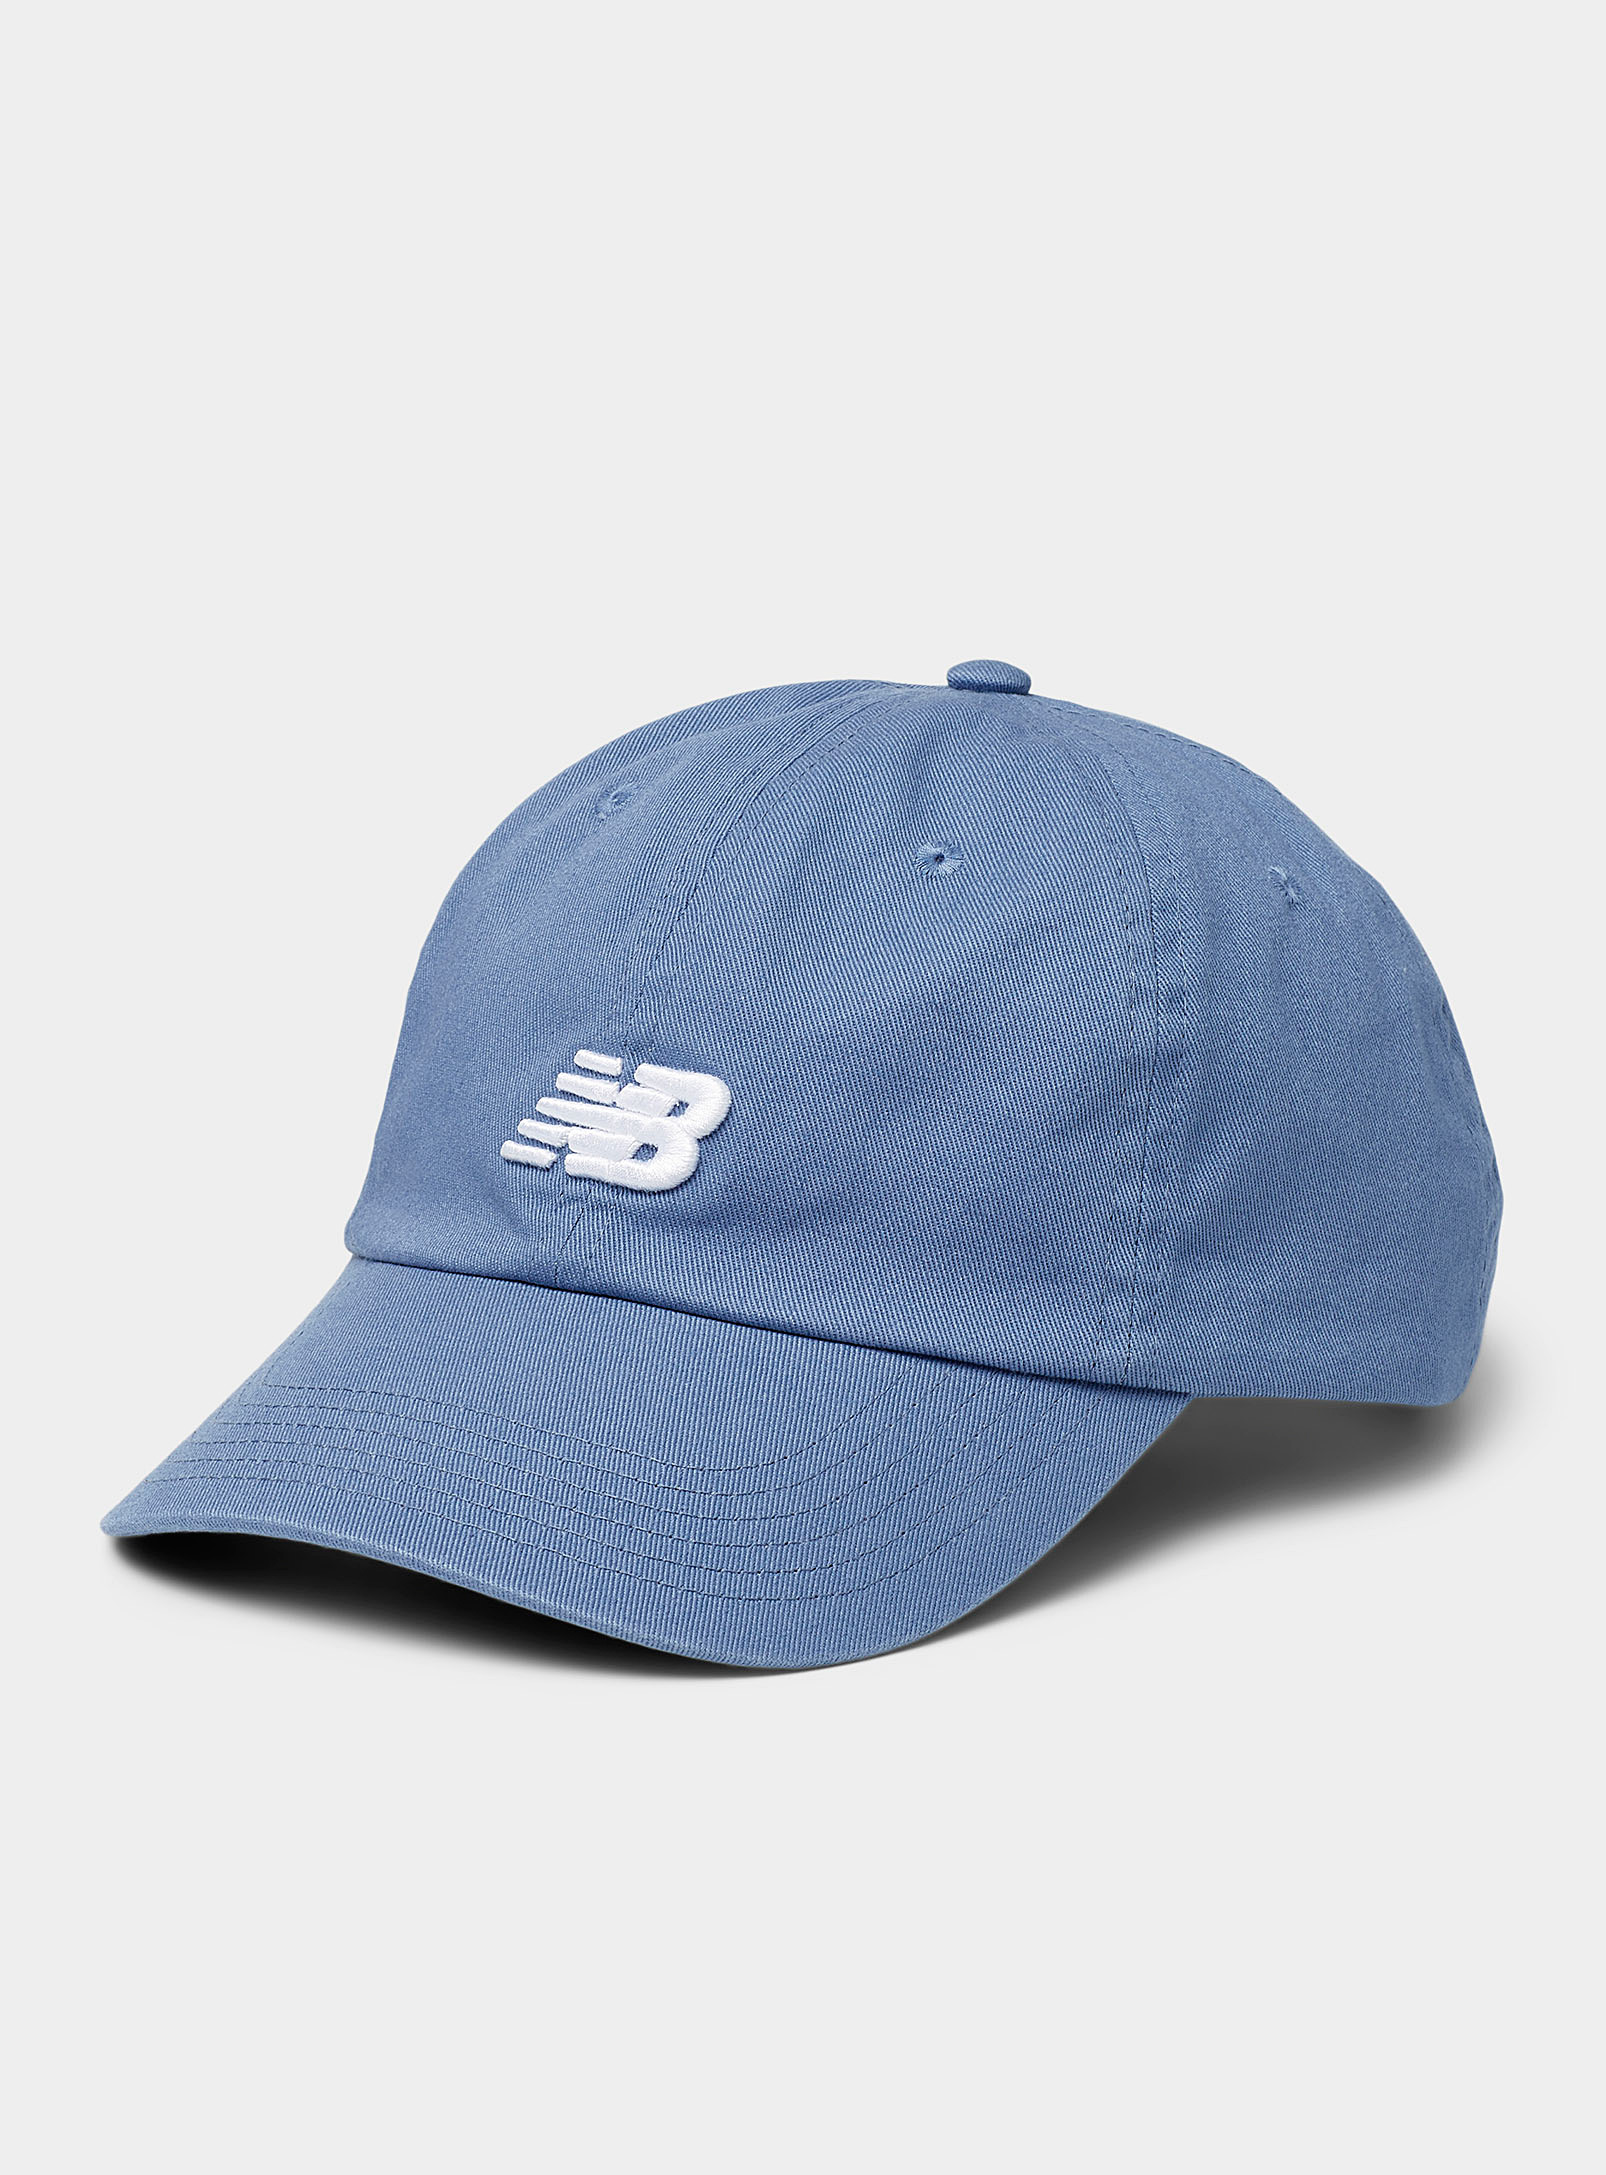 New Balance Embroidered Contrast Logo Baseball Cap In Blue